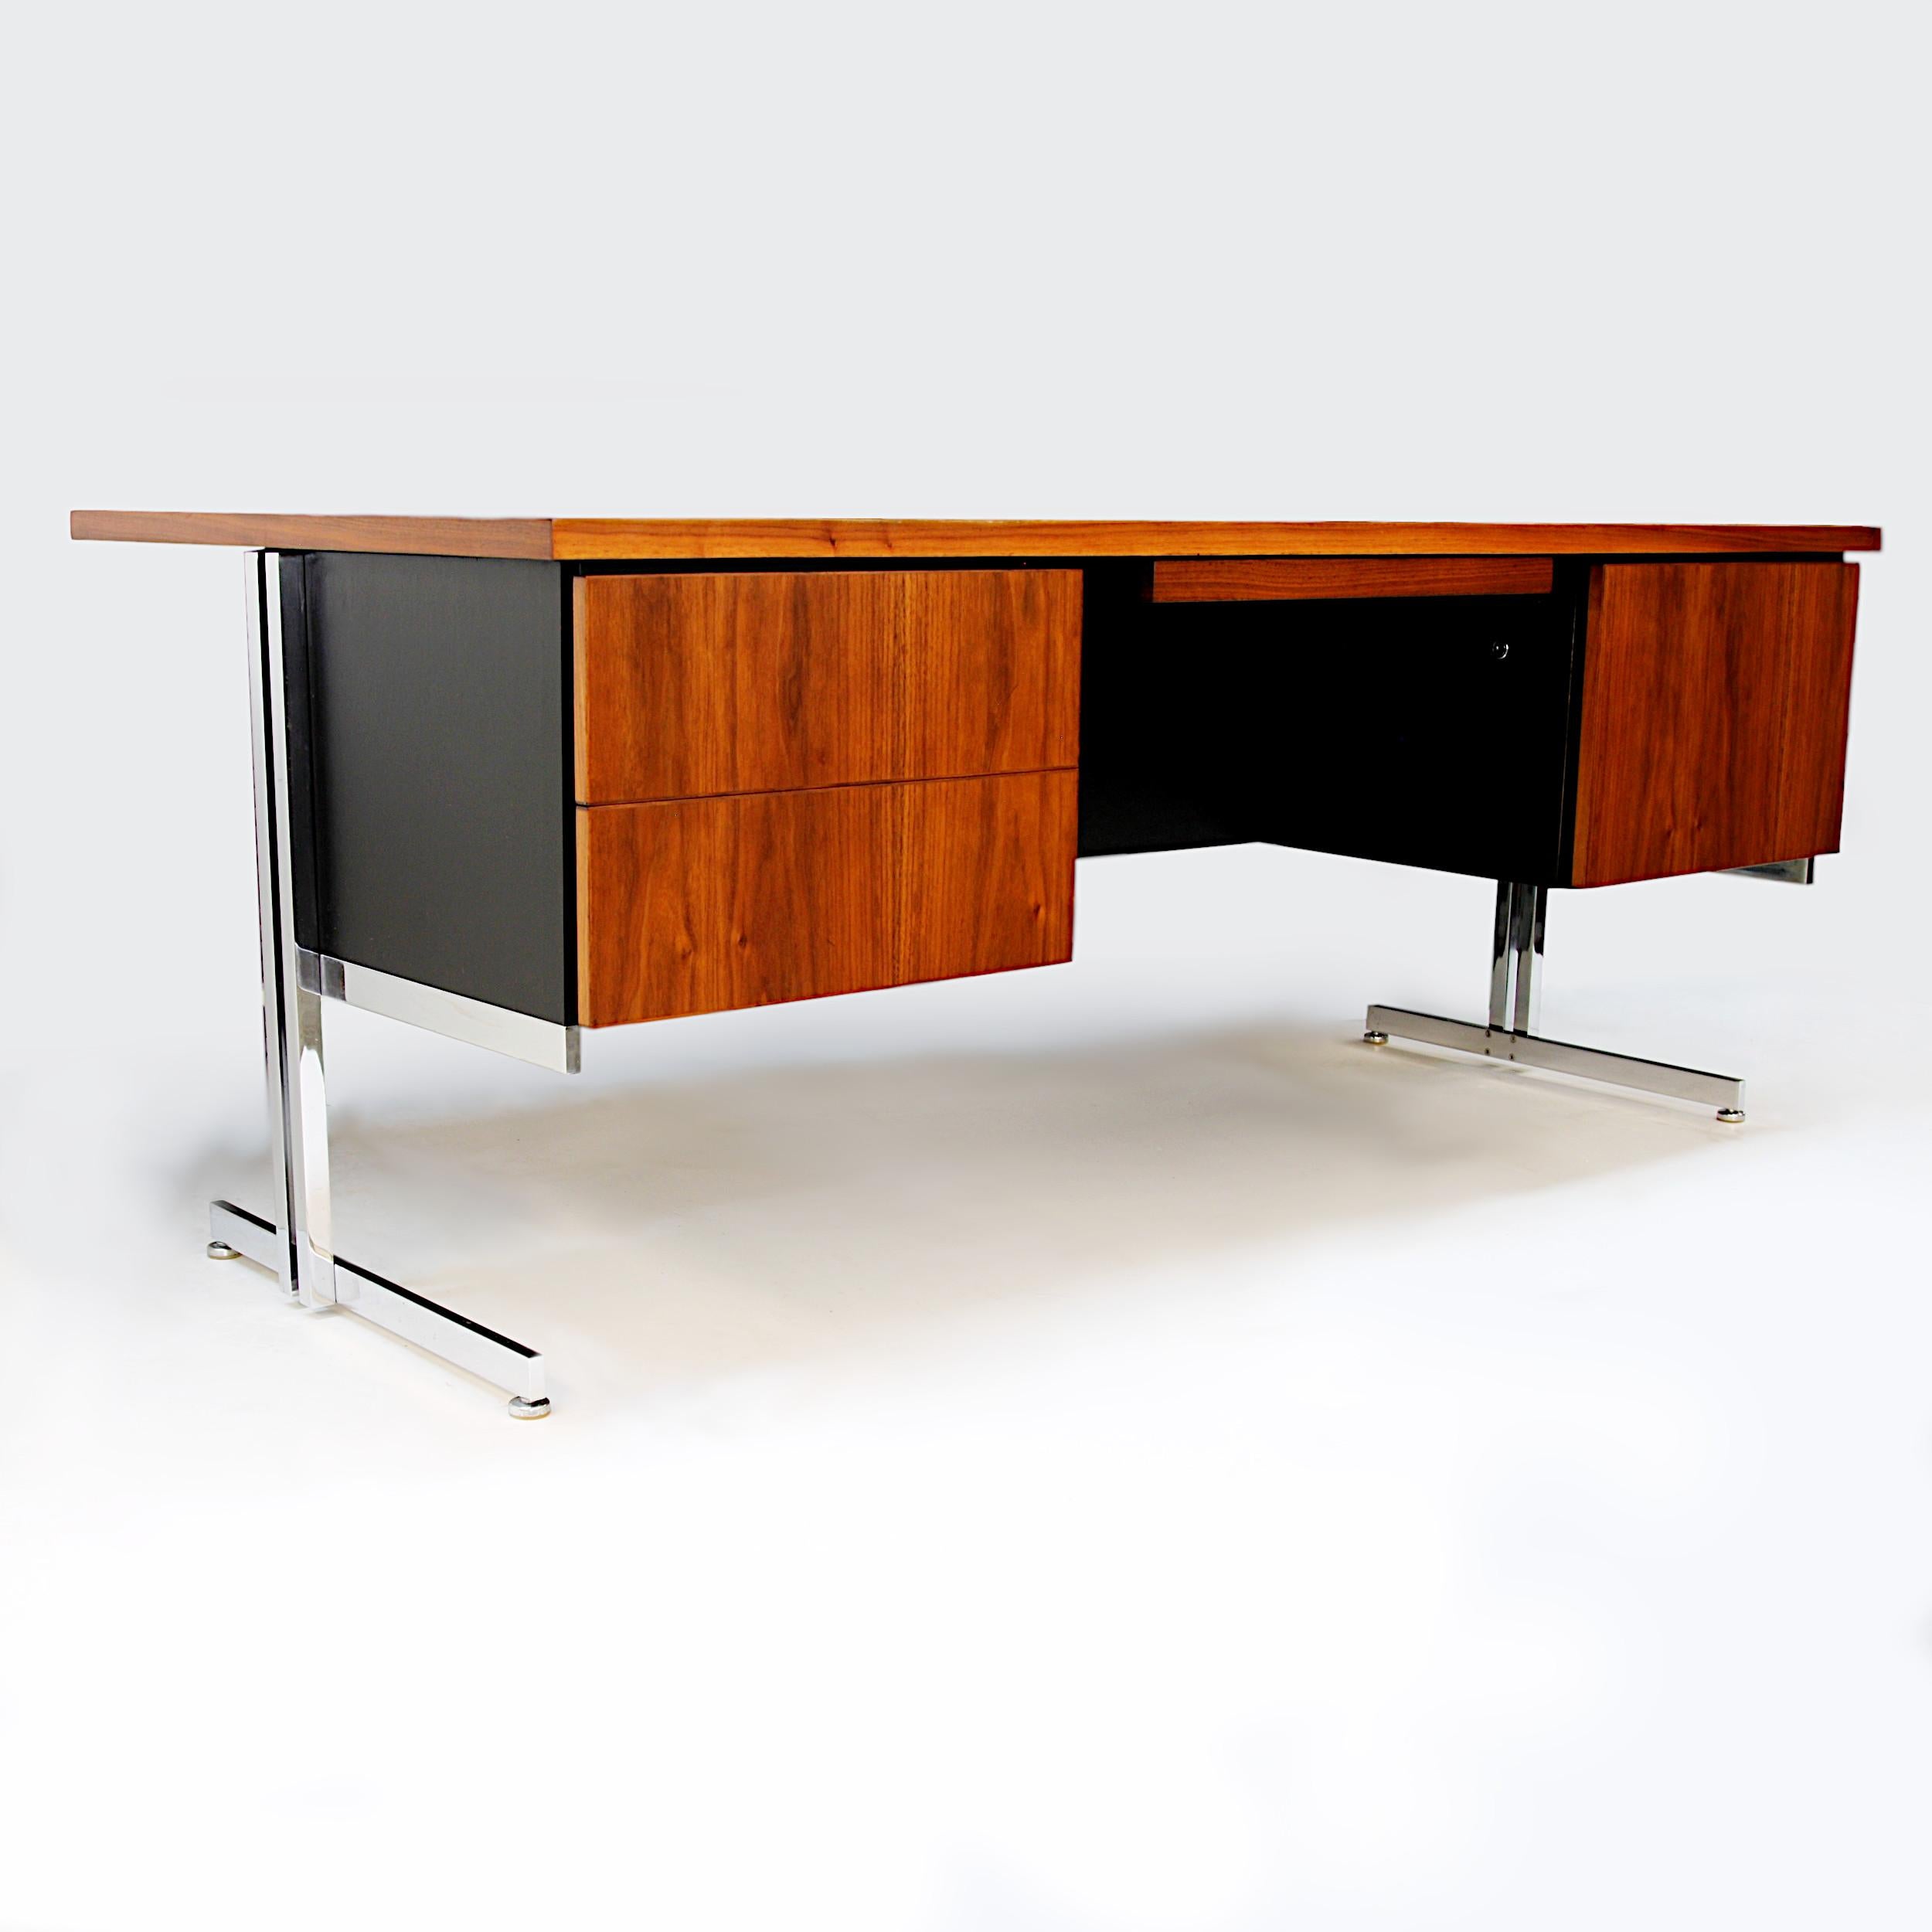 Rare executive desk designed by Hugh Acton for the Vecta Contract Co. Desk features matched-grain walnut cabinetry cantilevered over the Classic Acton chromed-steel base. With its wonderful, architecturally-inspired, Minimalist design, this would